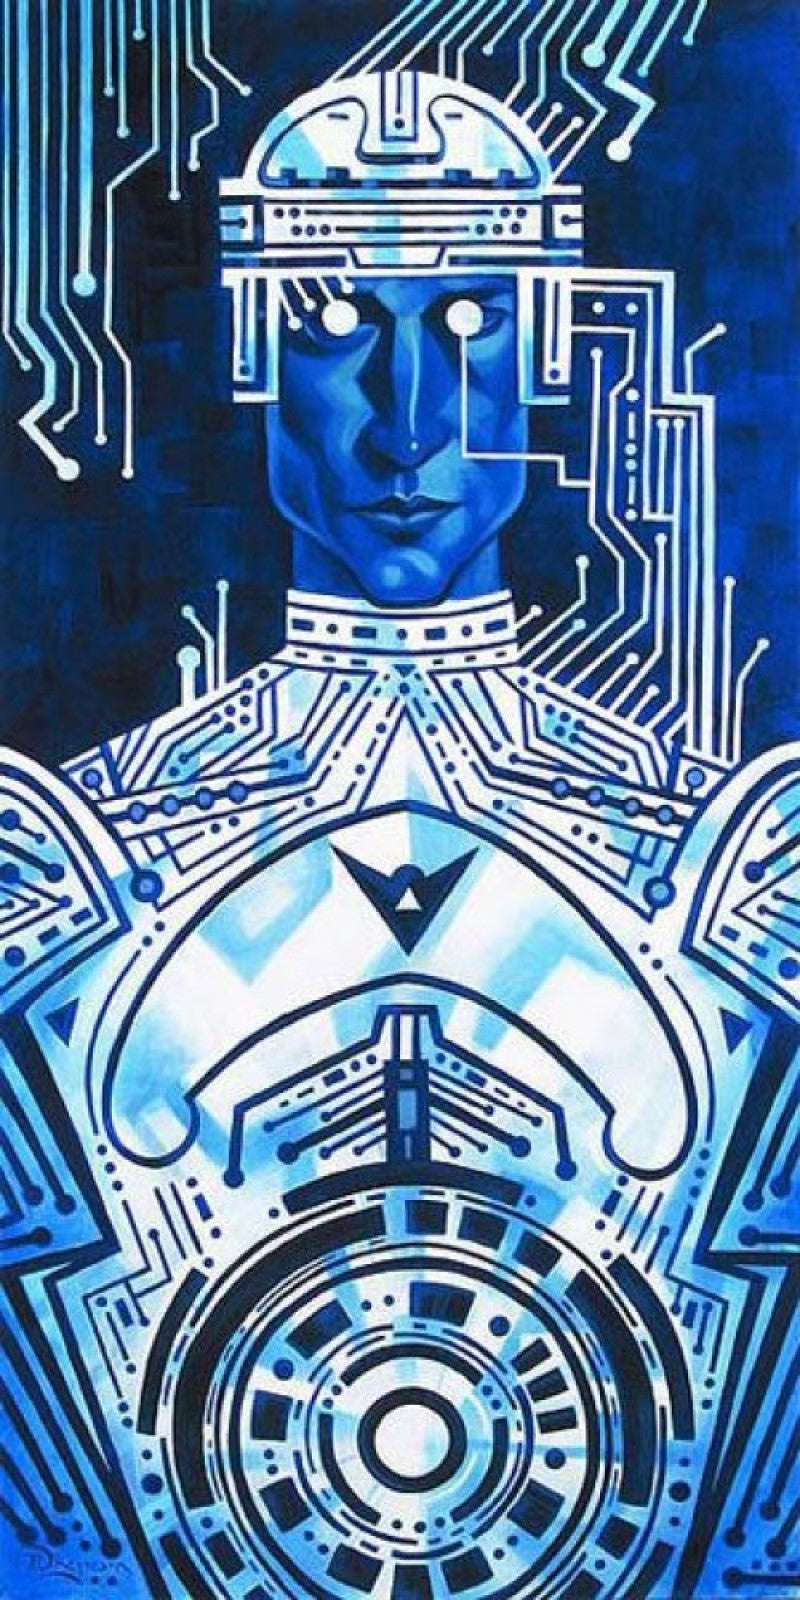 Tron In Silicon by Tim Rogerson inspired by the film Tron